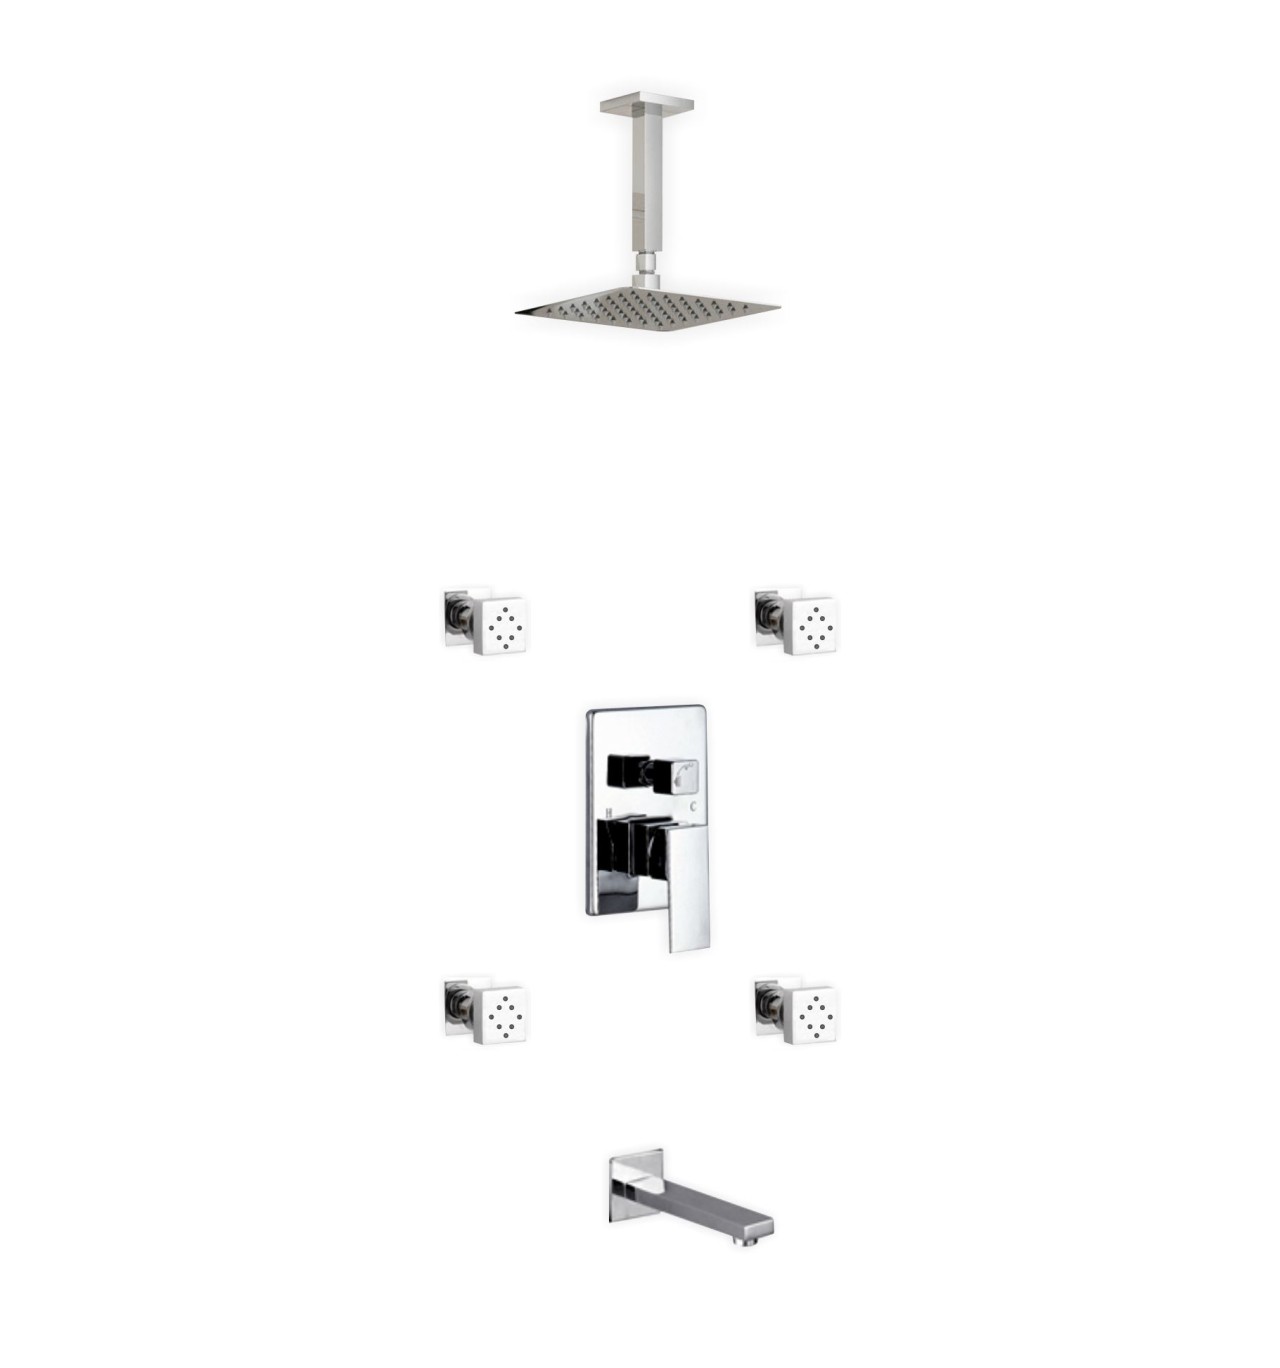 Aqua Piazza Brass Shower Set with 8" Ceiling Mount Square Rain Shower, Tub Filler and 4 Body Jets